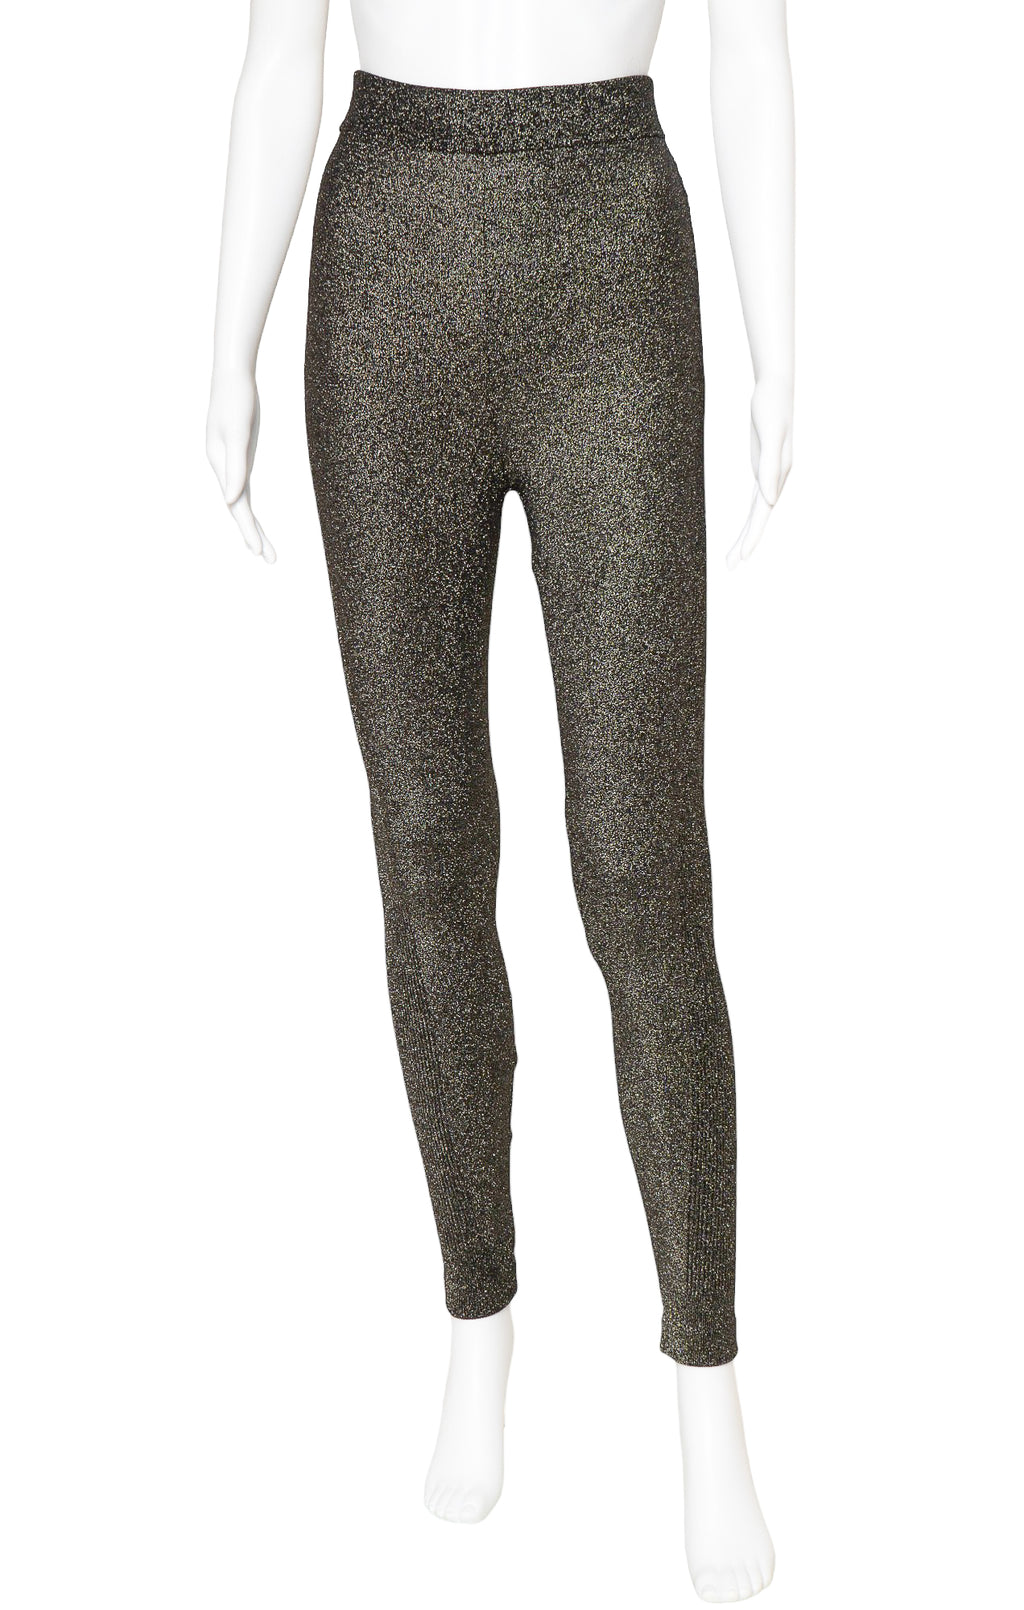 T BY ALEXANDER WANG (NEW) with tags Leggings Size: S